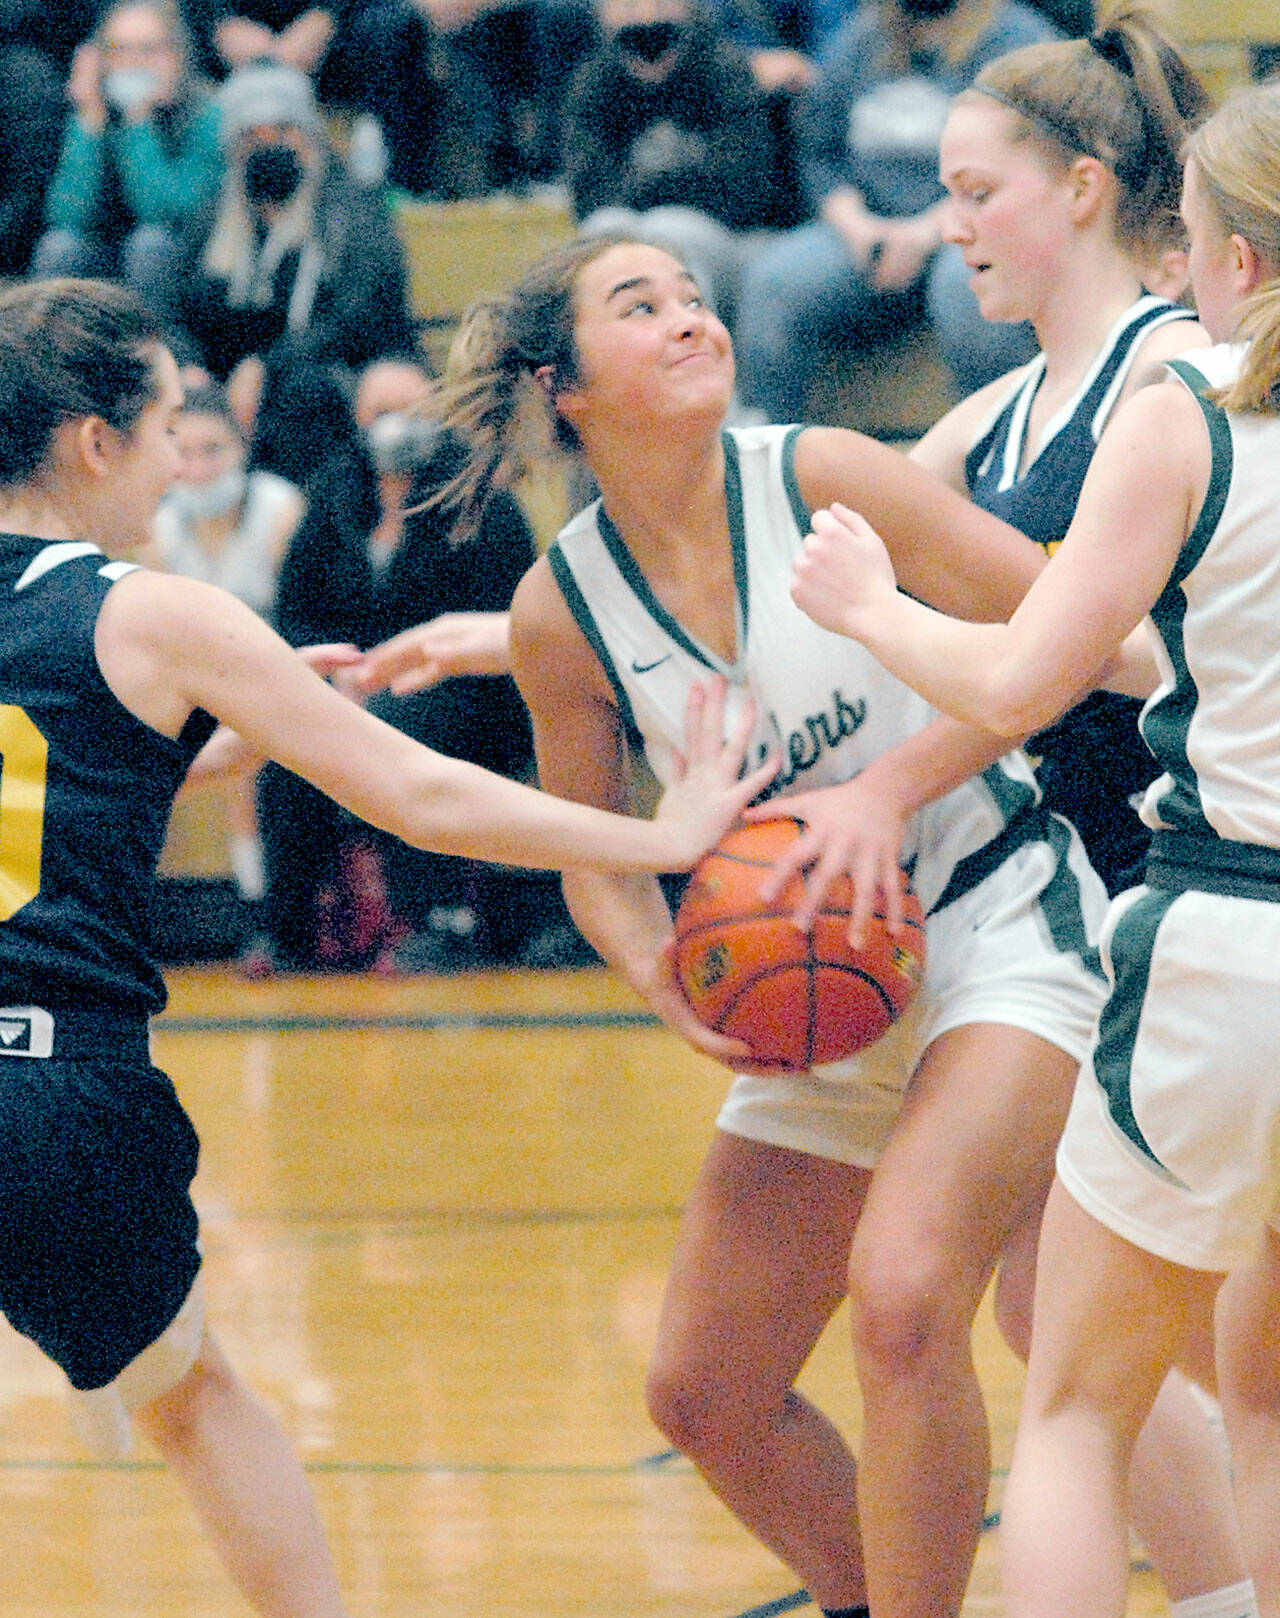 Port Angeles’ Eve Burke, center, looks for the hoop while defended by Bainbridge’s Caroline Payne, left, and Macy Kingrey on Thursday in Port Angeles. (Keith Thorpe/Peninsula Daily News)